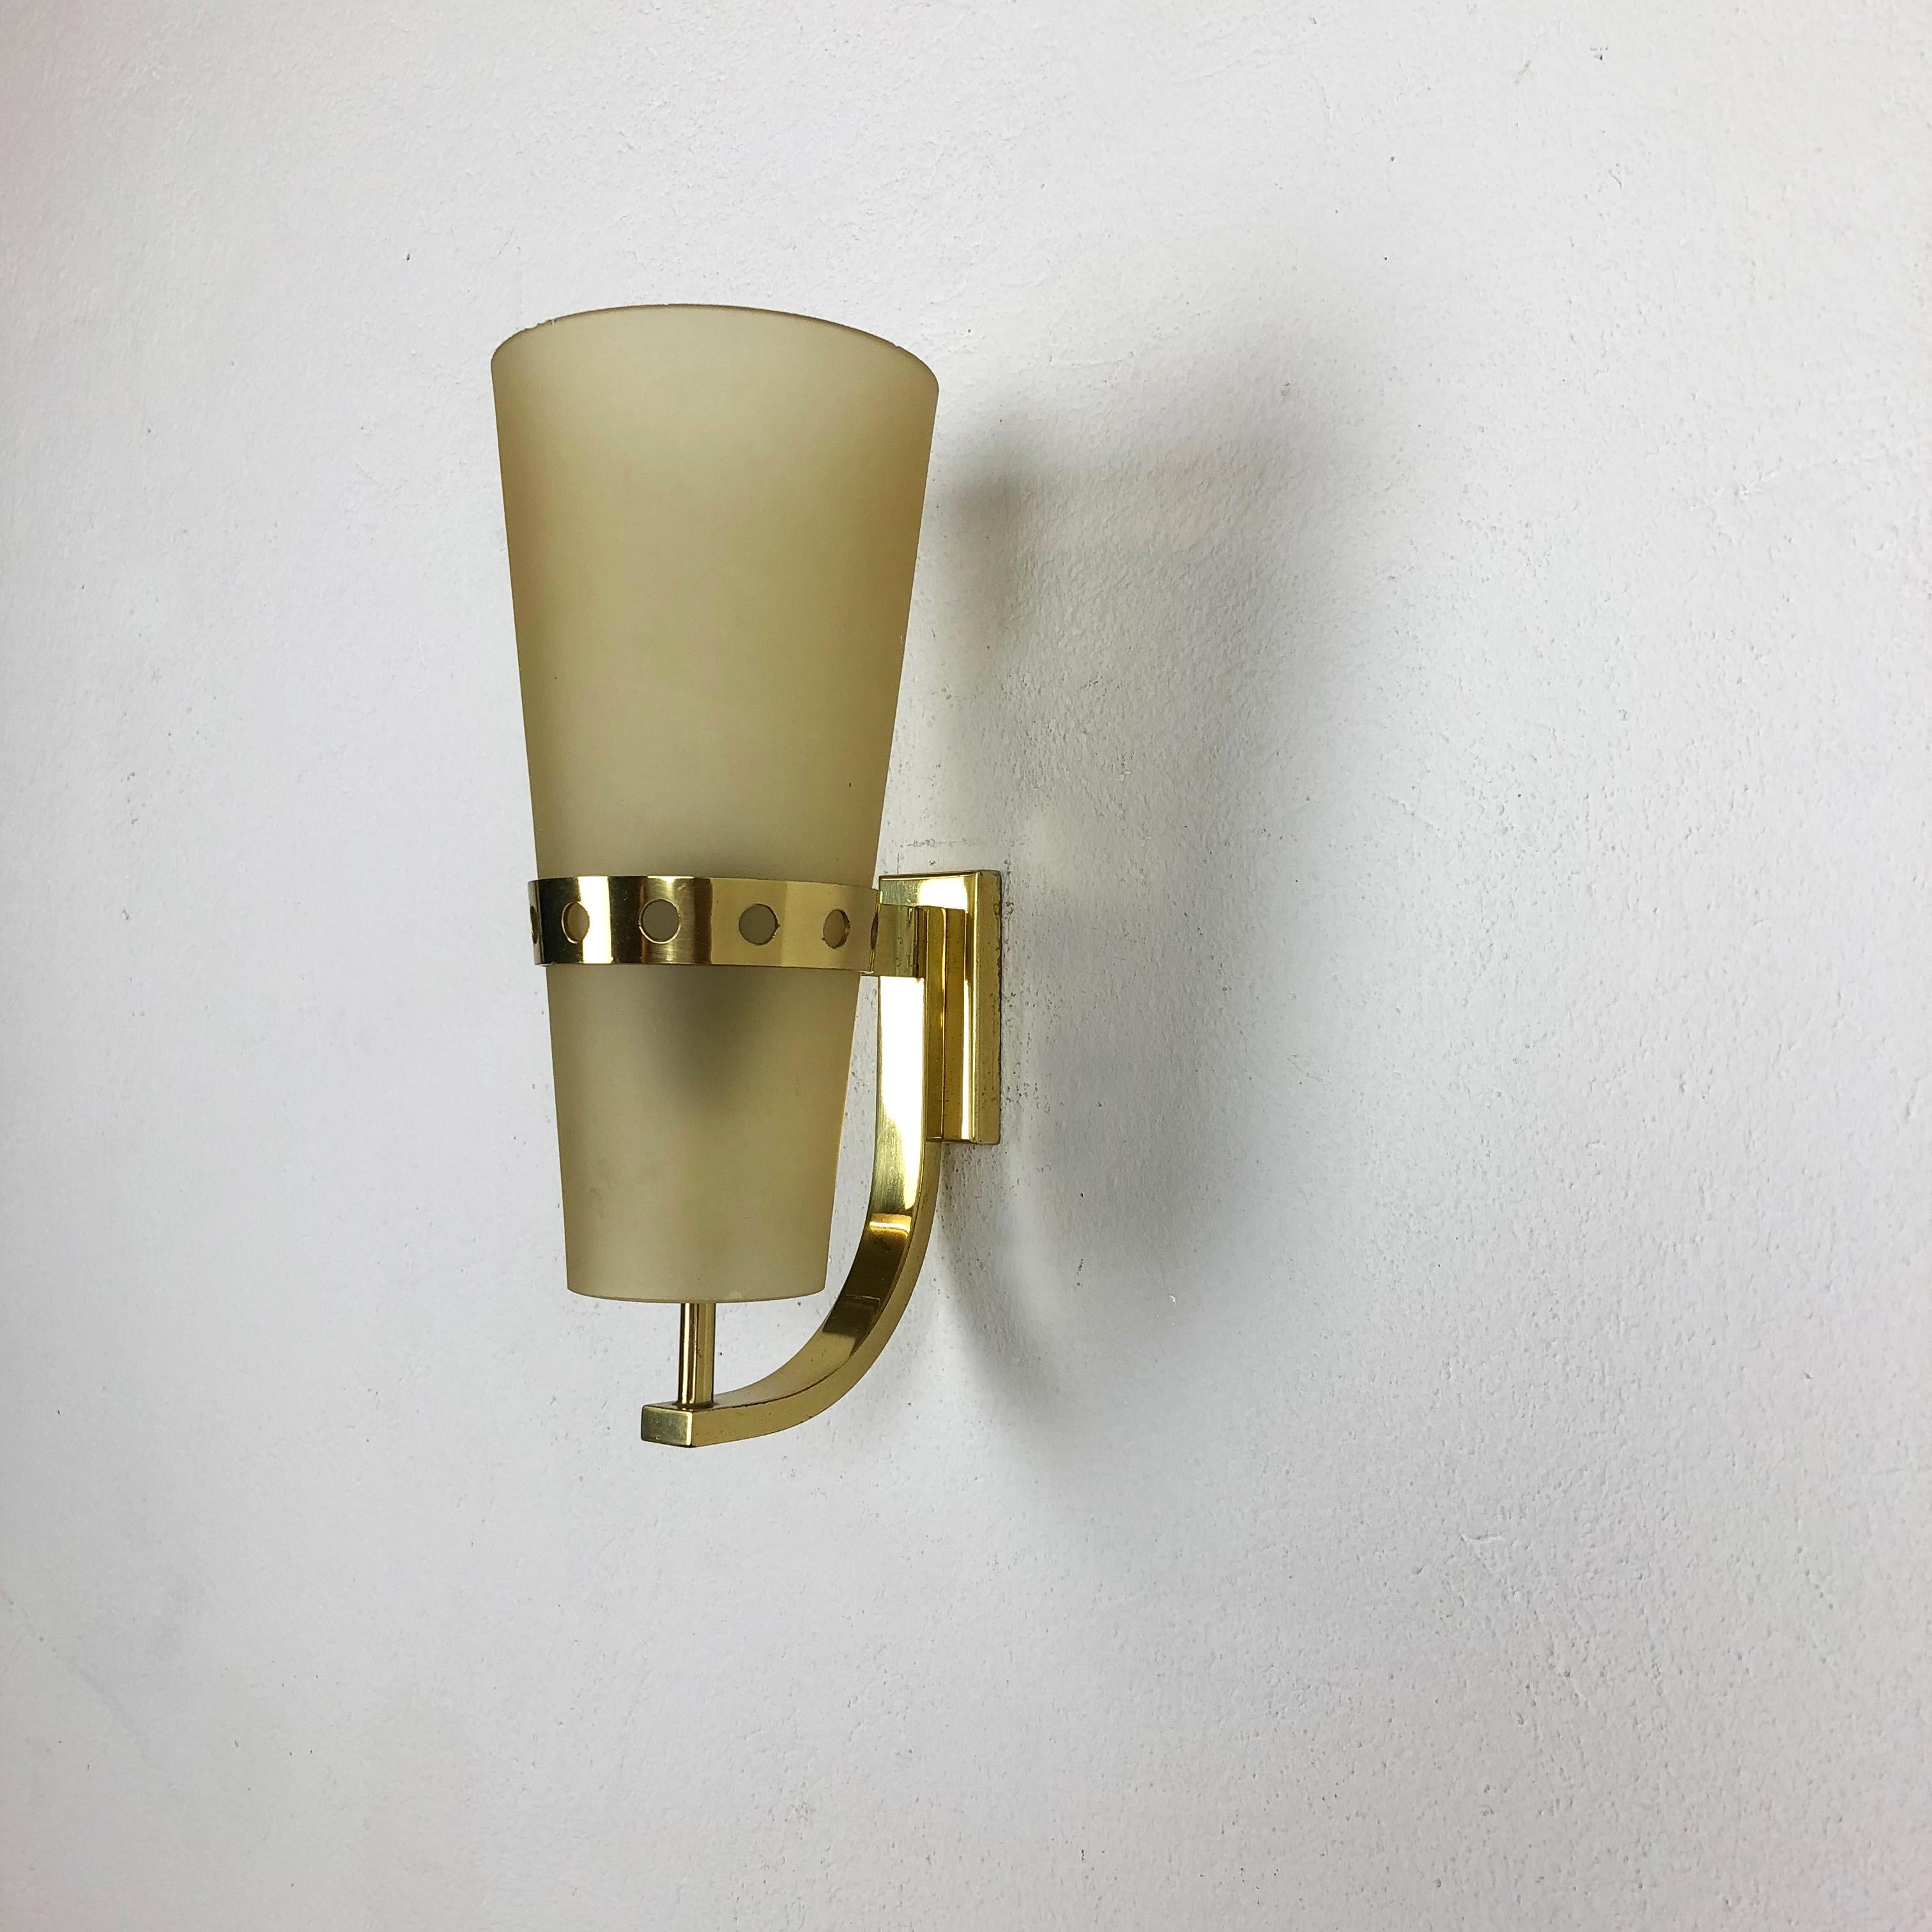 20th Century Set of Two Modernist Brass Italian Wall Lights Sconces, Italy, 1950s